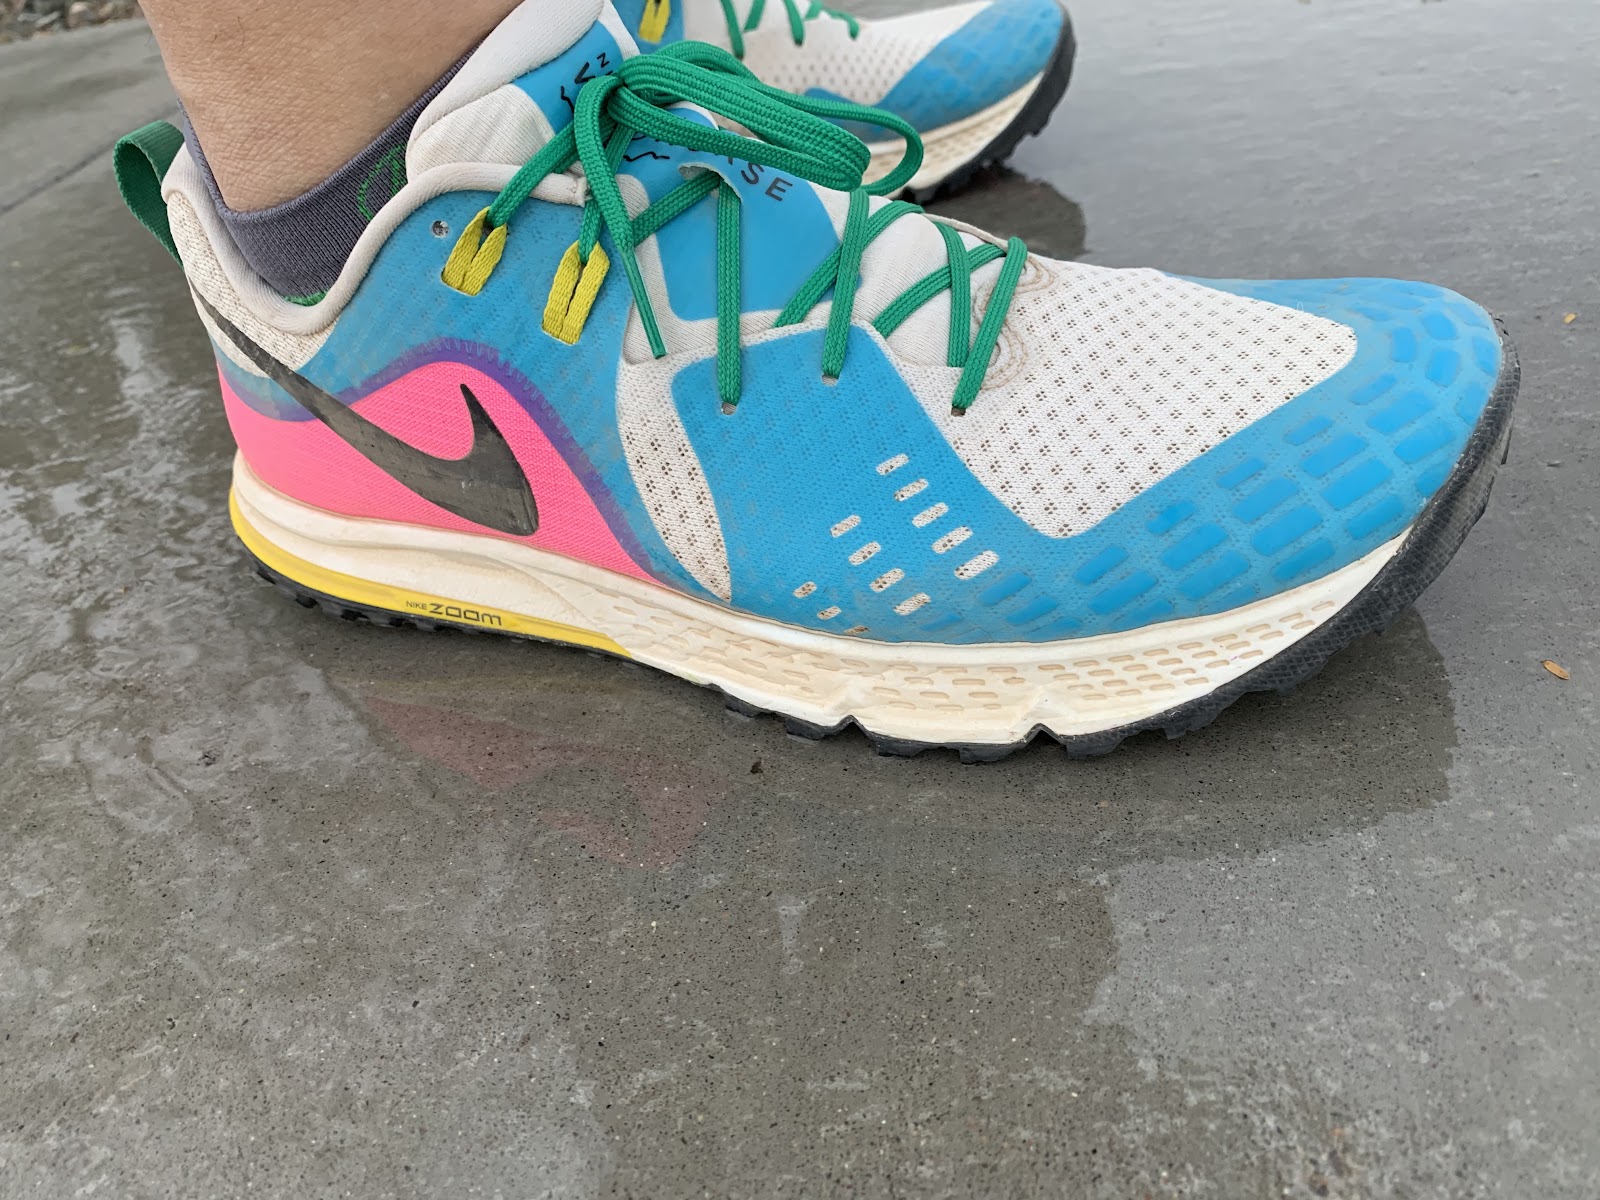 detalles repentinamente Helecho Road Trail Run: Nike Air Zoom Wildhorse 5 Review - Finally a new Wildhorse,  but mostly the same Wildhorse